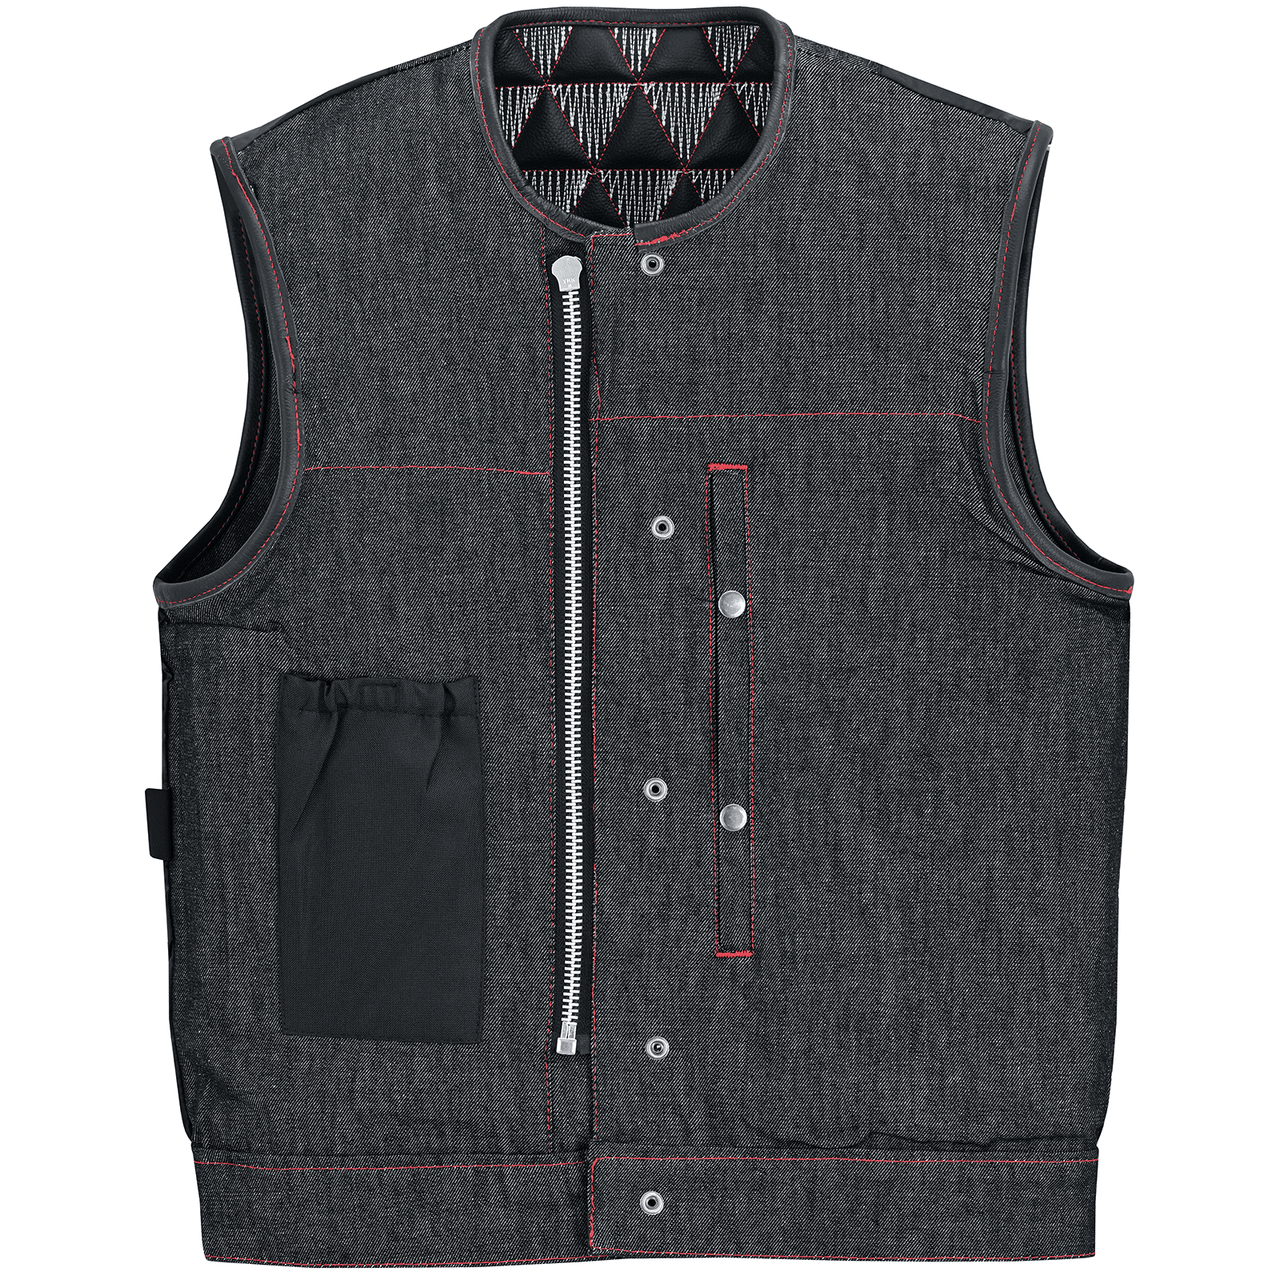 Men's-Denim-Leather-Motorcycle-Vest-with-Conceal-Carry-Pockets-SOA-Biker-Club-Vest-Red-White-Stitching-inside-out-view